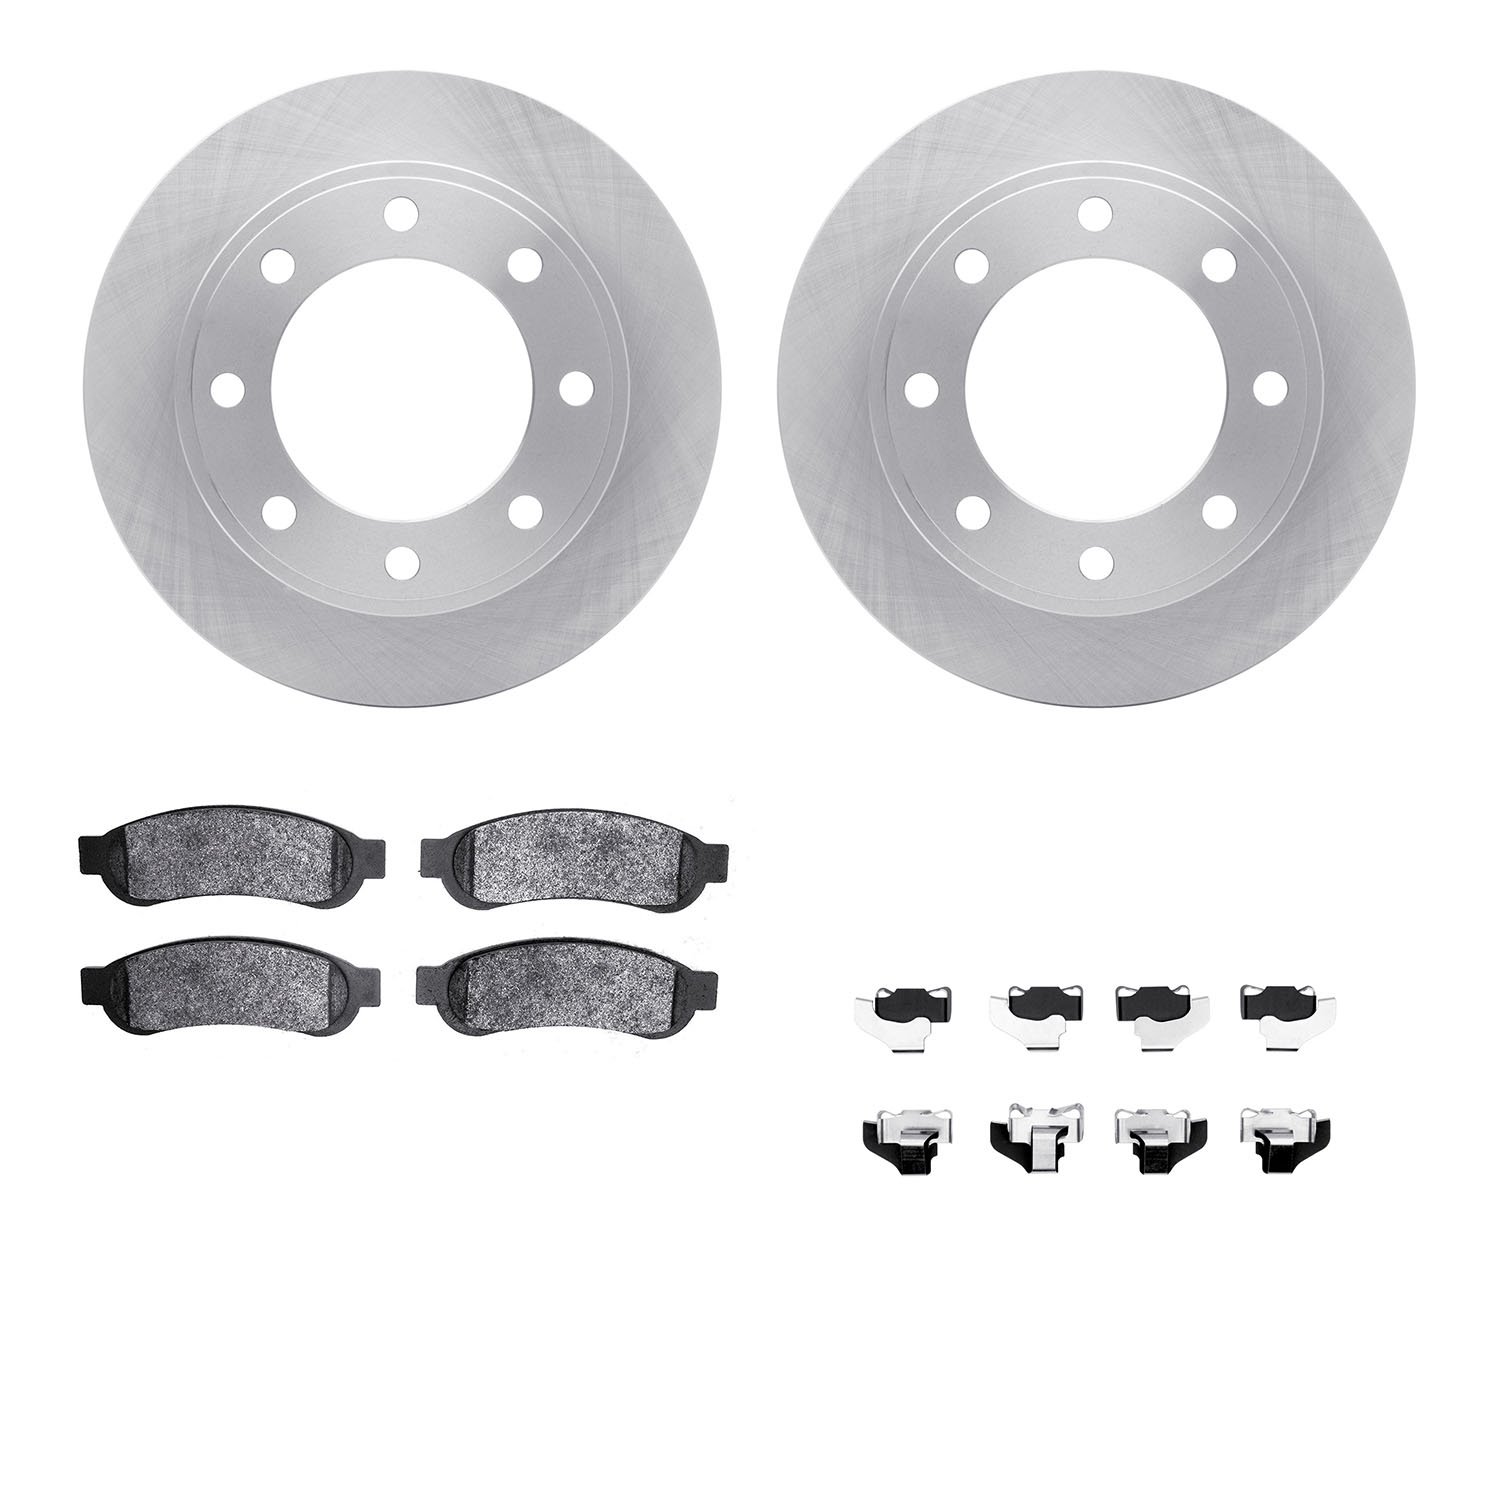 6412-54247 Brake Rotors with Ultimate-Duty Brake Pads Kit & Hardware, 2010-2012 Ford/Lincoln/Mercury/Mazda, Position: Rear